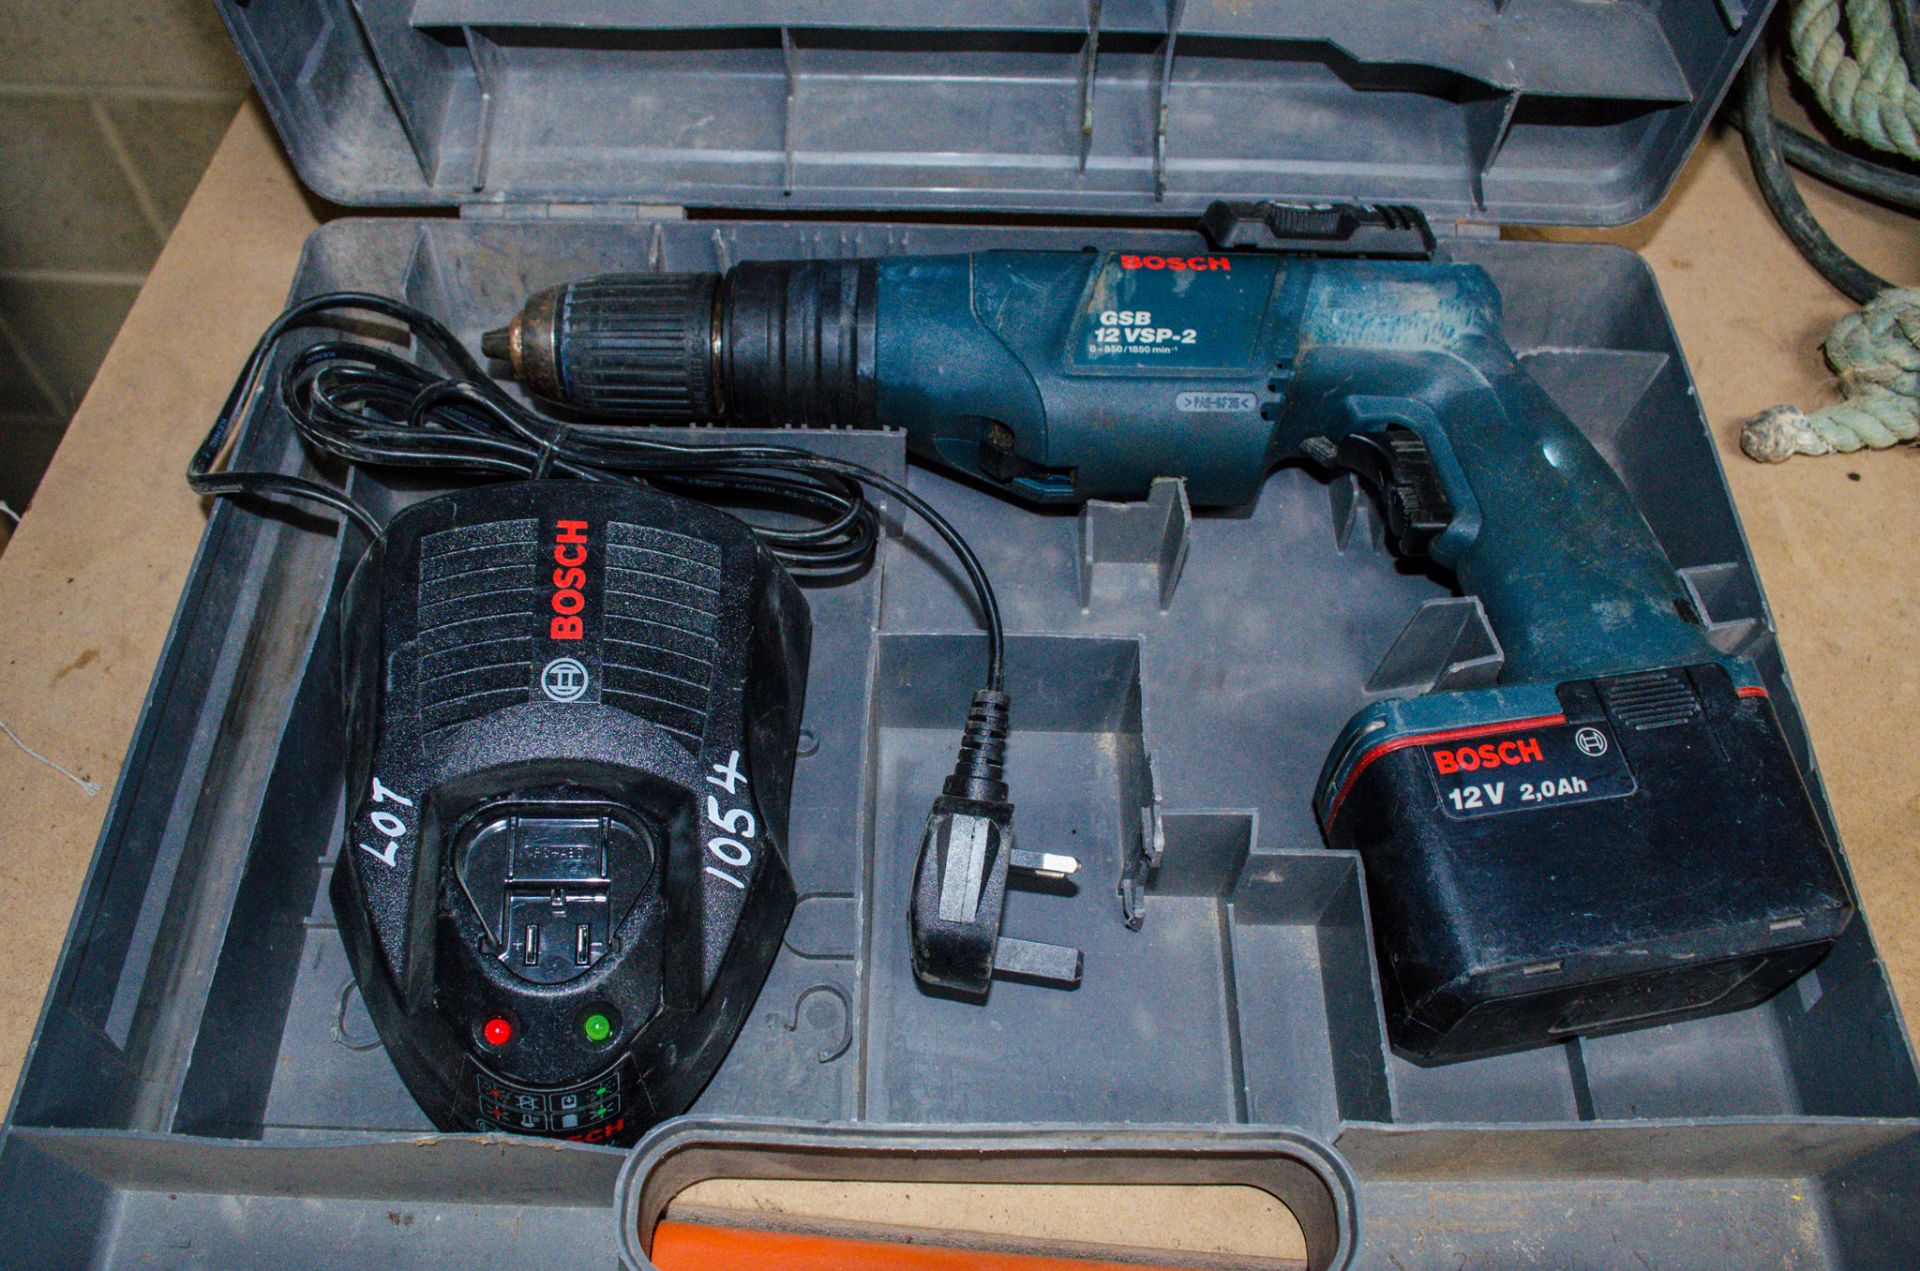 Bosch G-SB 12 VSP-2 12v cordless drill battery, charger & carry case ** Switch disconnected **